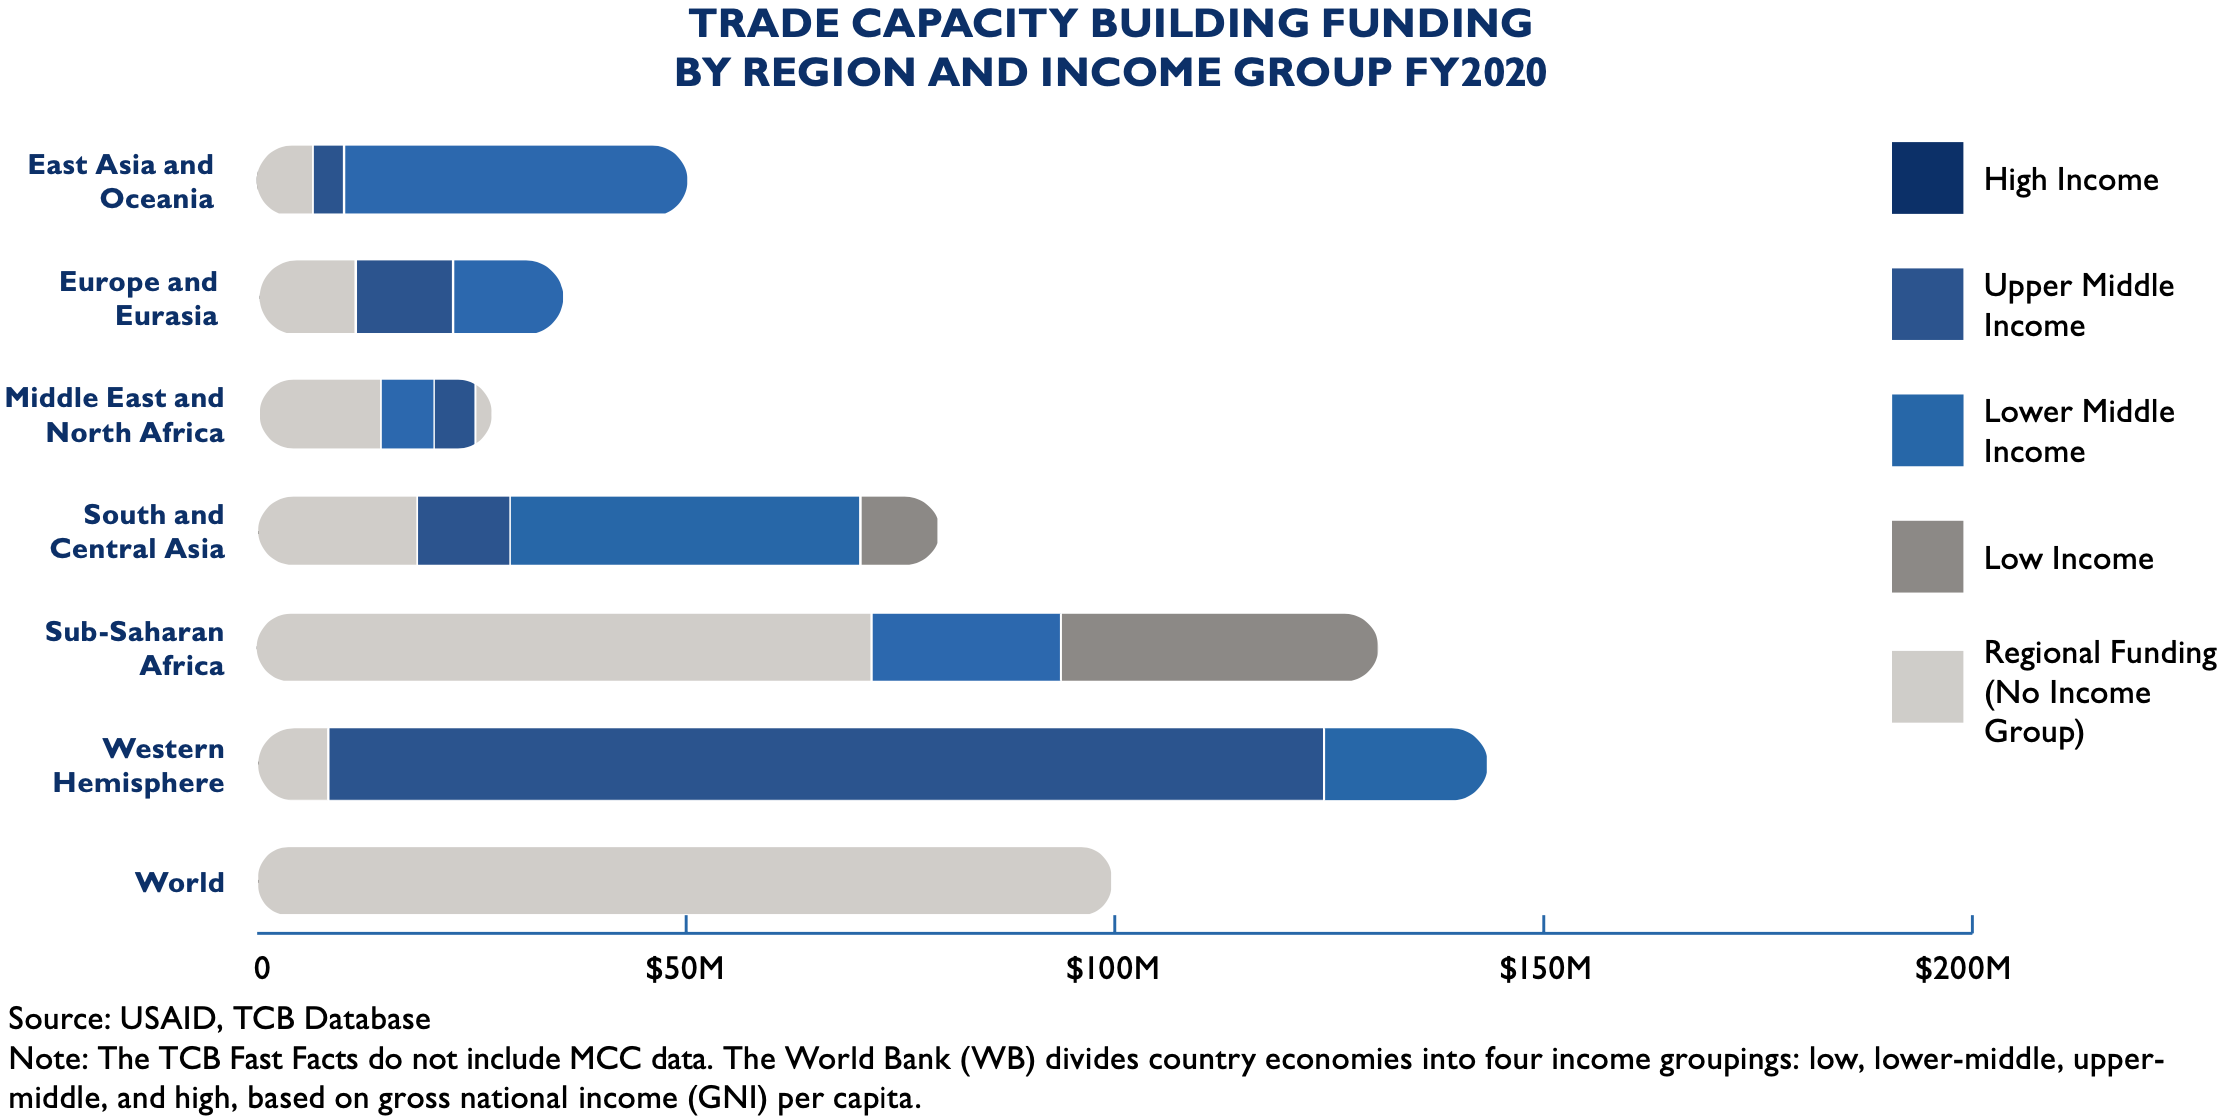 Bar chart of trade capacity building funding by region and income group FY2021